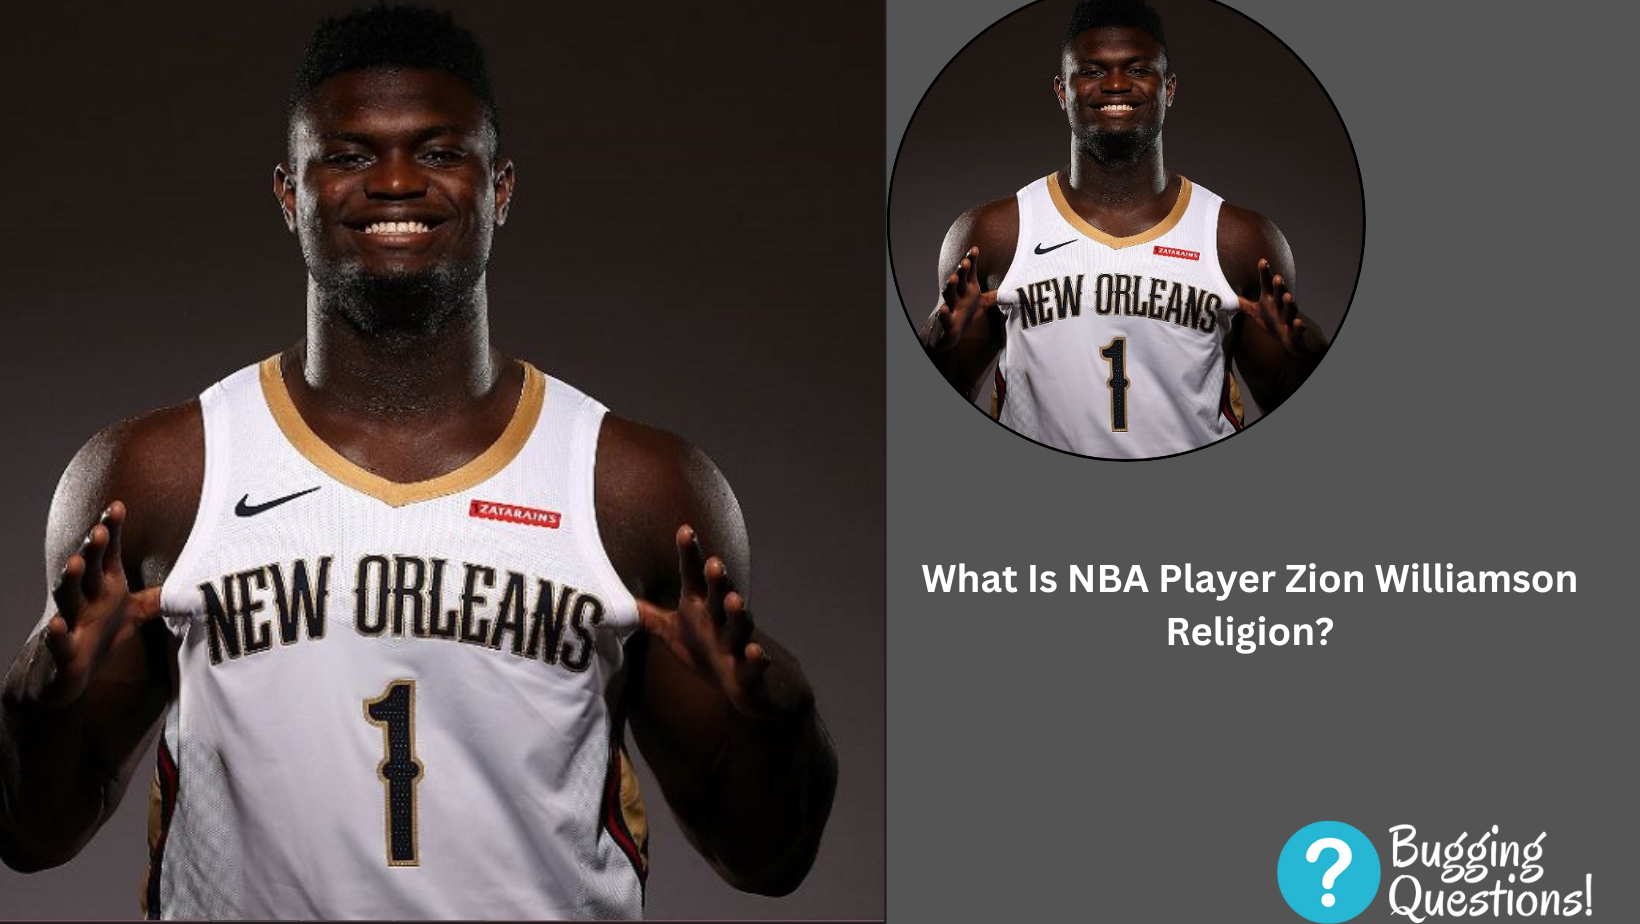 What Is NBA Player Zion Williamson Religion?